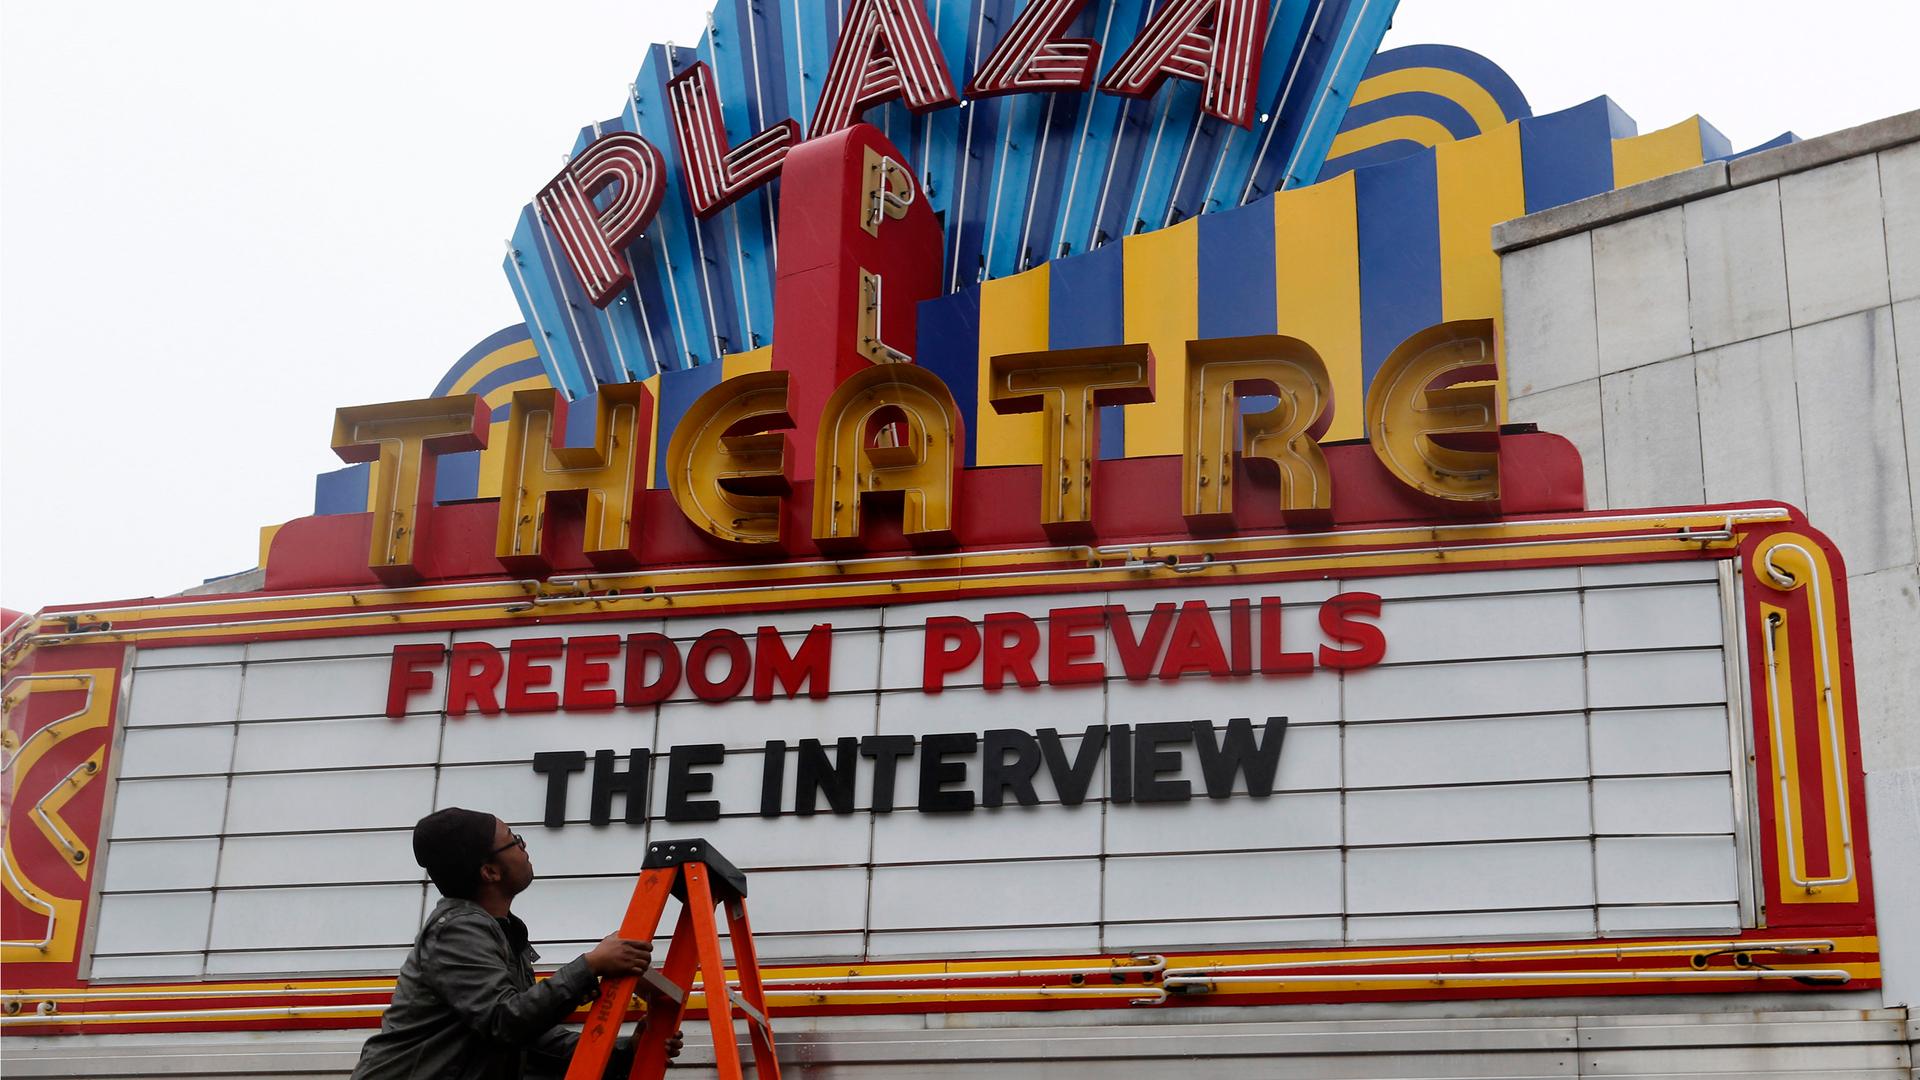 General Manager Brandon Delaney looks up at the marquee sign after the announcement that the Plaza Theatre would be showing the movie "The Interview" beginning Christmas Day in Atlanta, Georgia December 23, 2014.